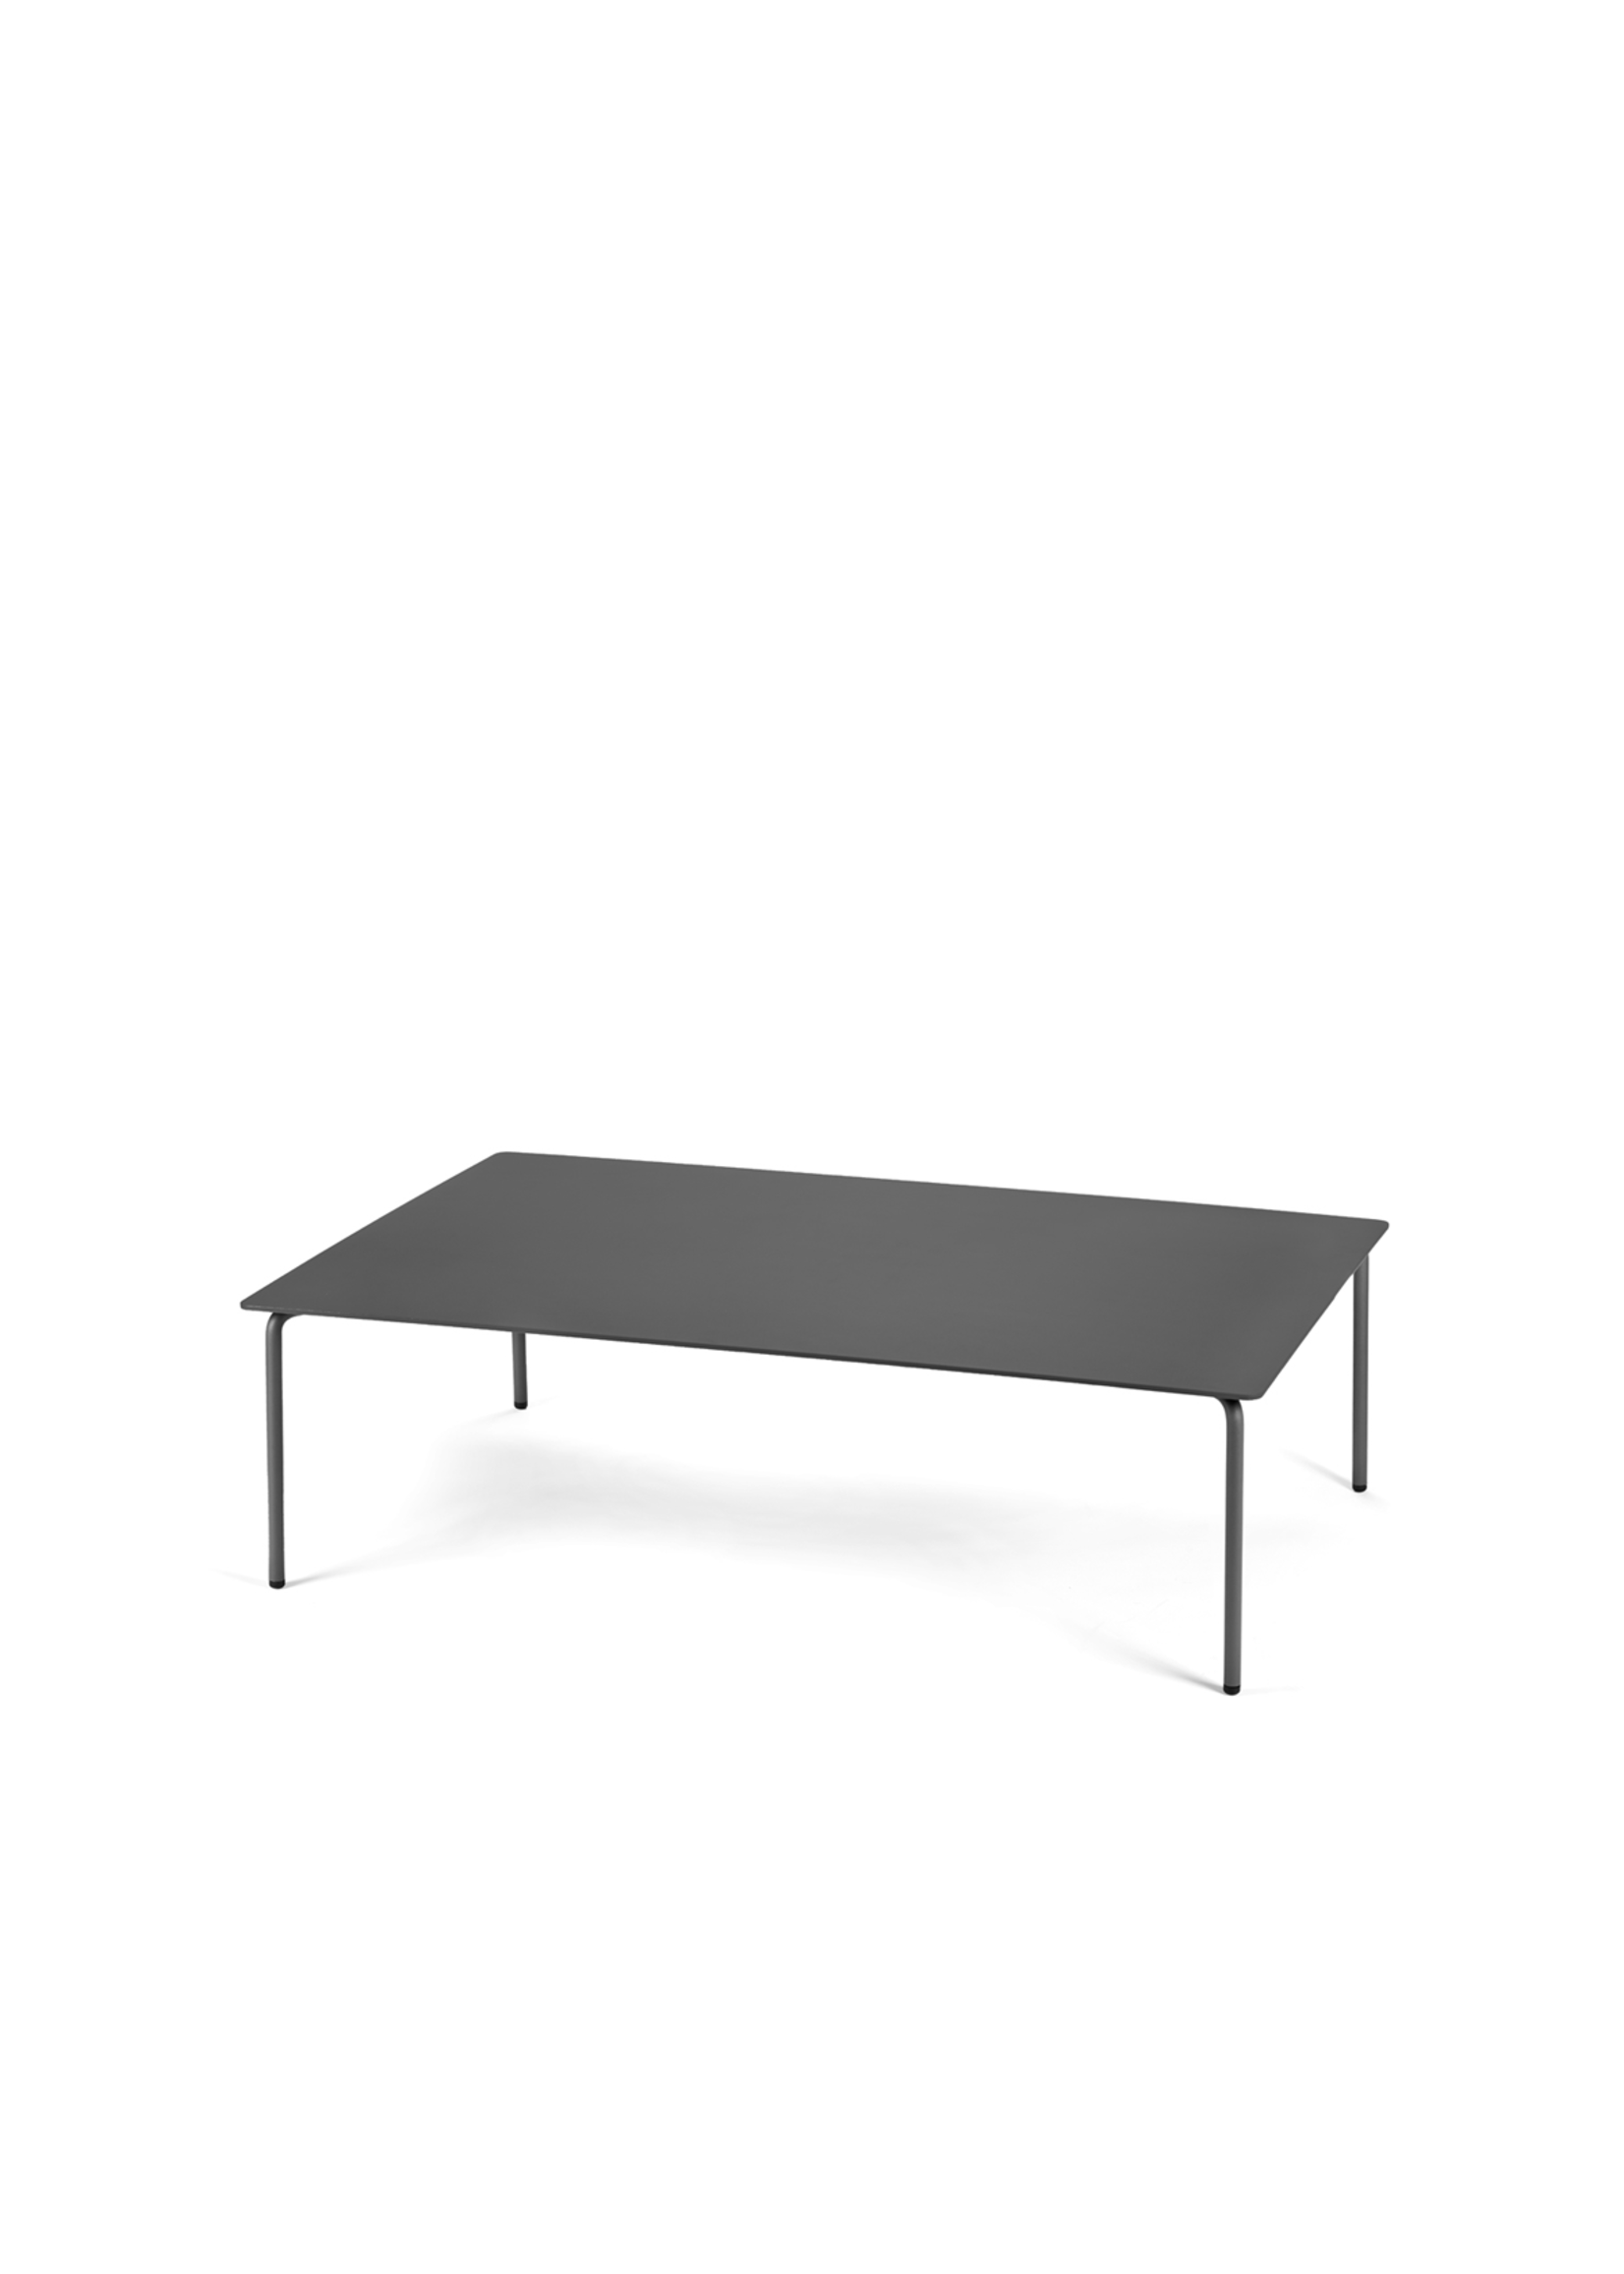 Serax August - Outdoor - Low Table - Black - 120/80